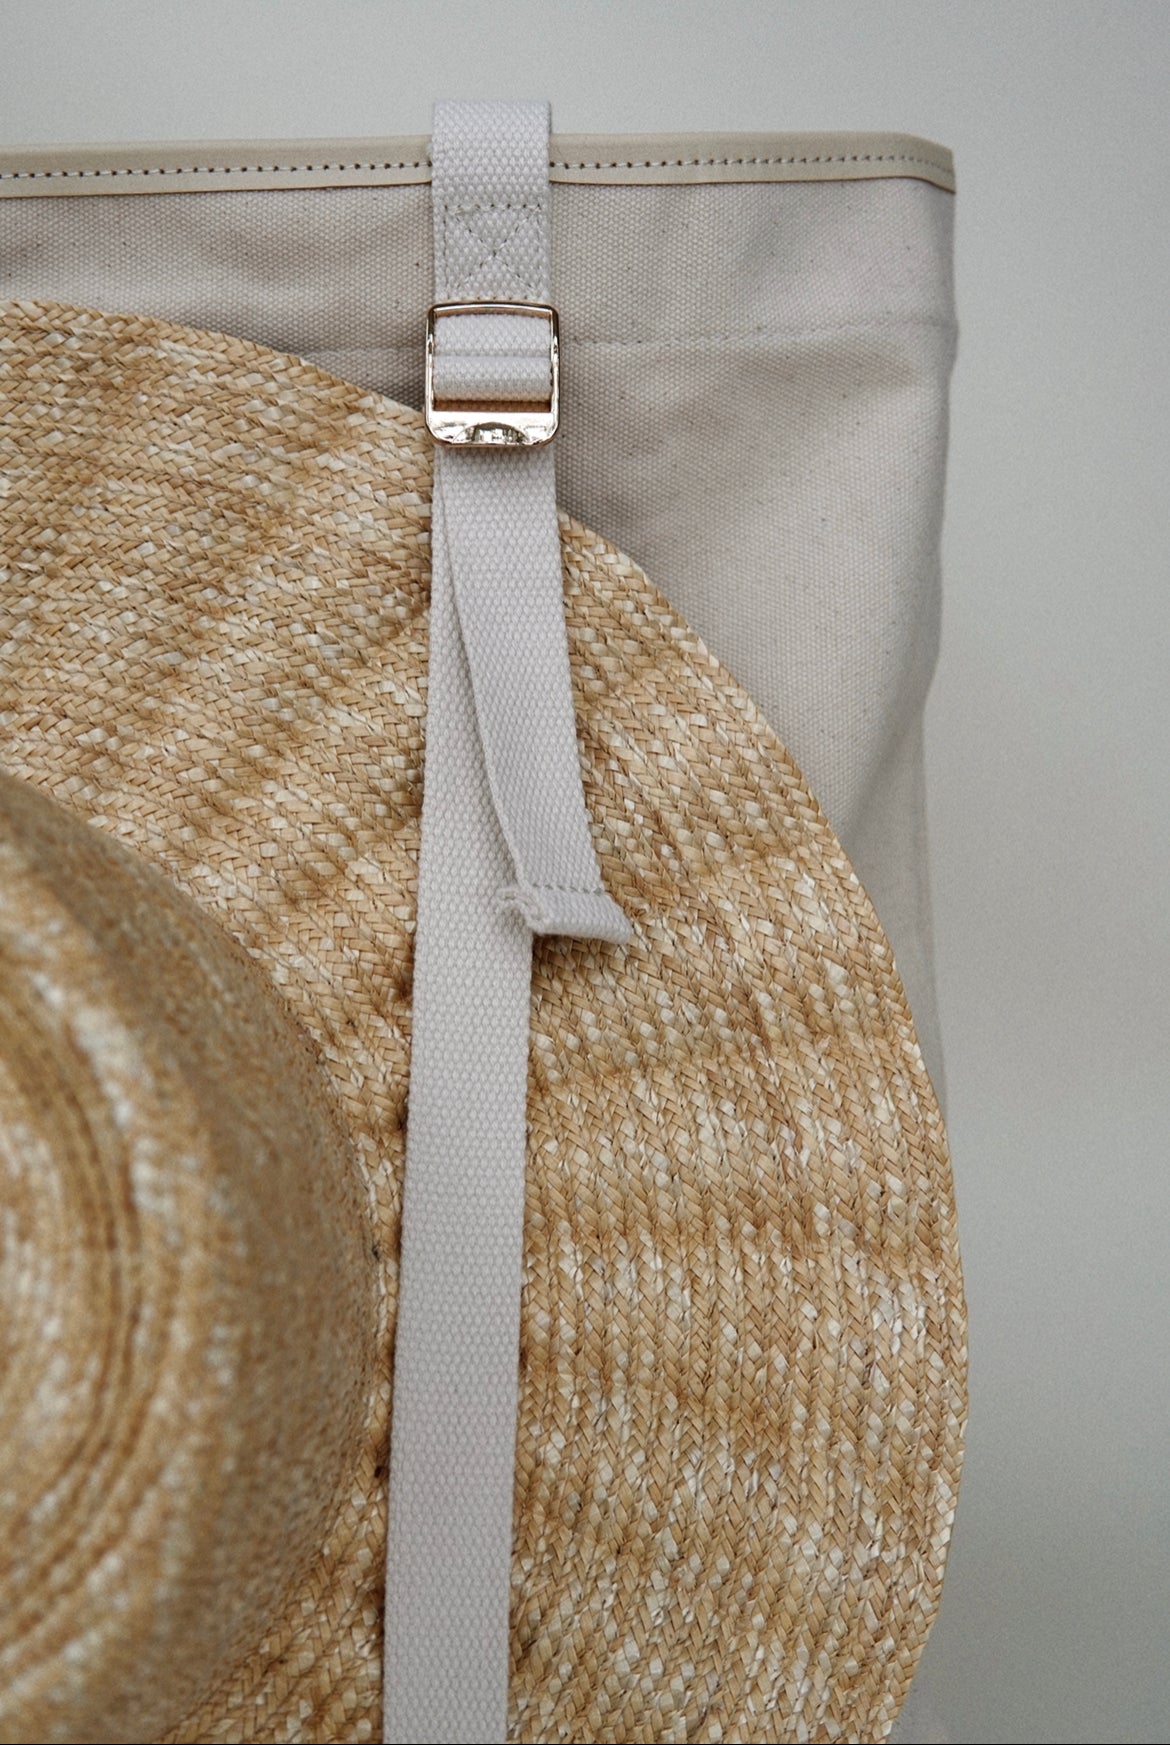 On Holiday - Hat Travel Tote